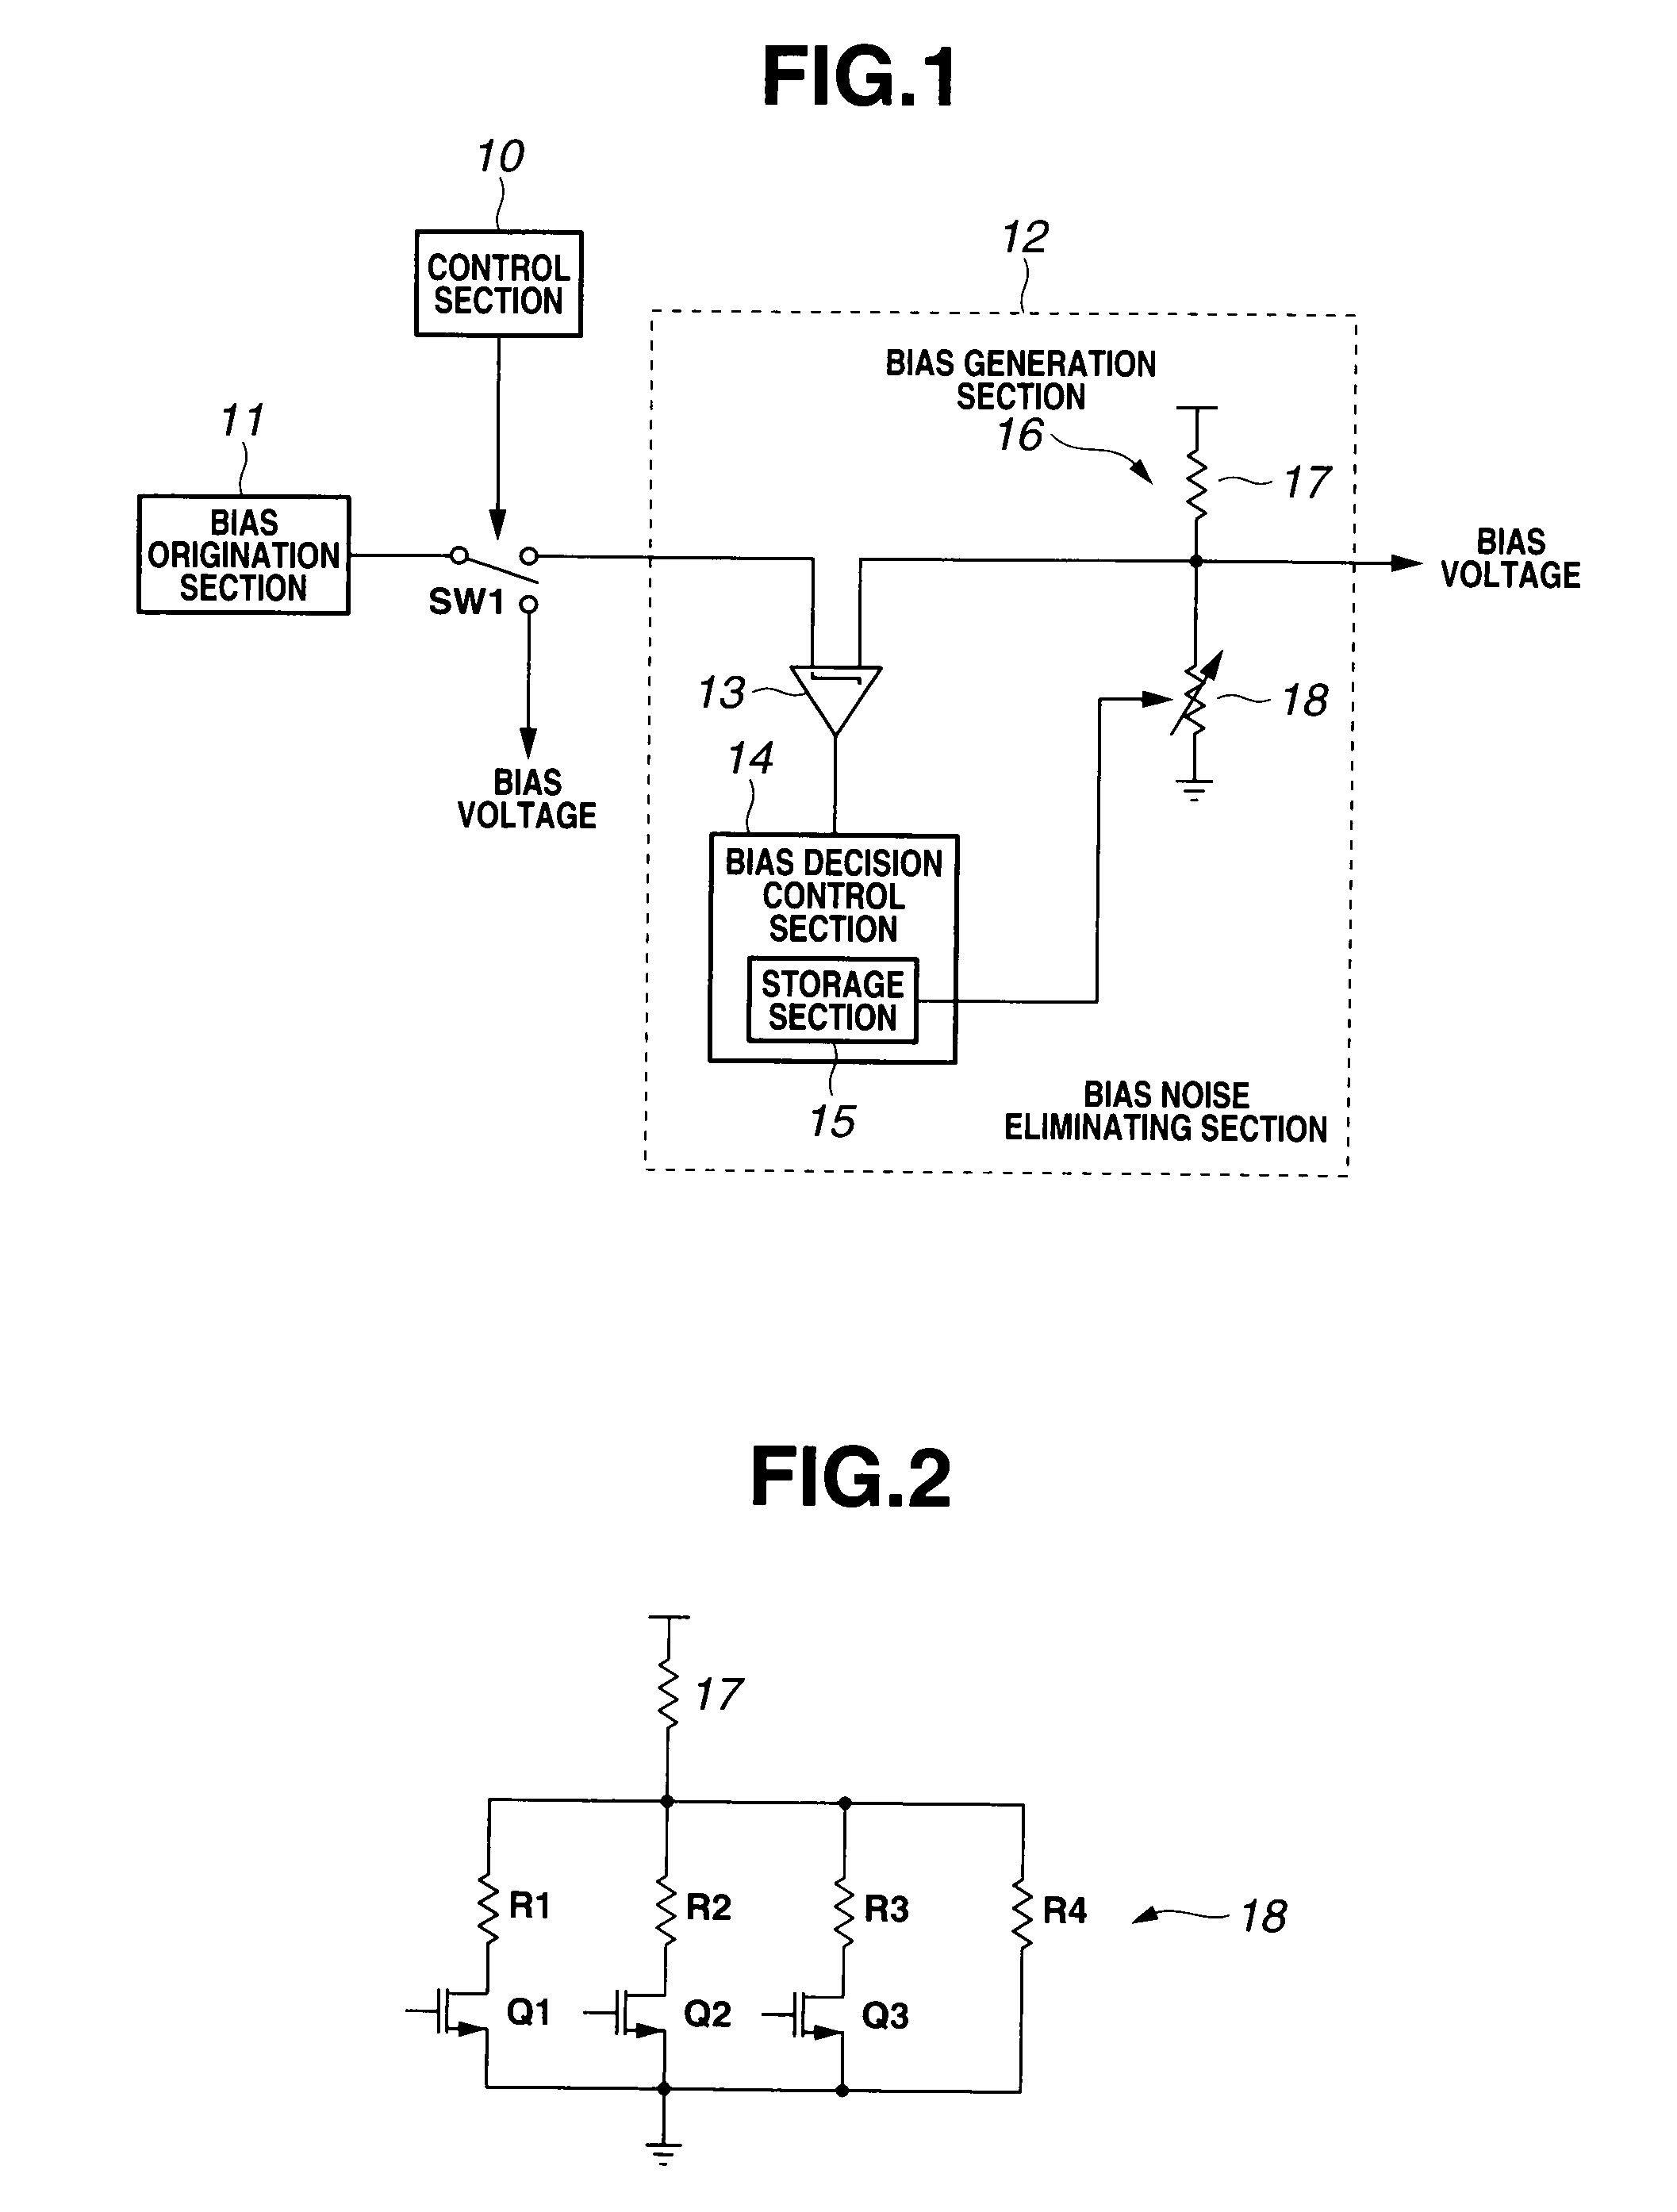 Bias generation circuit and voltage controlled oscillator